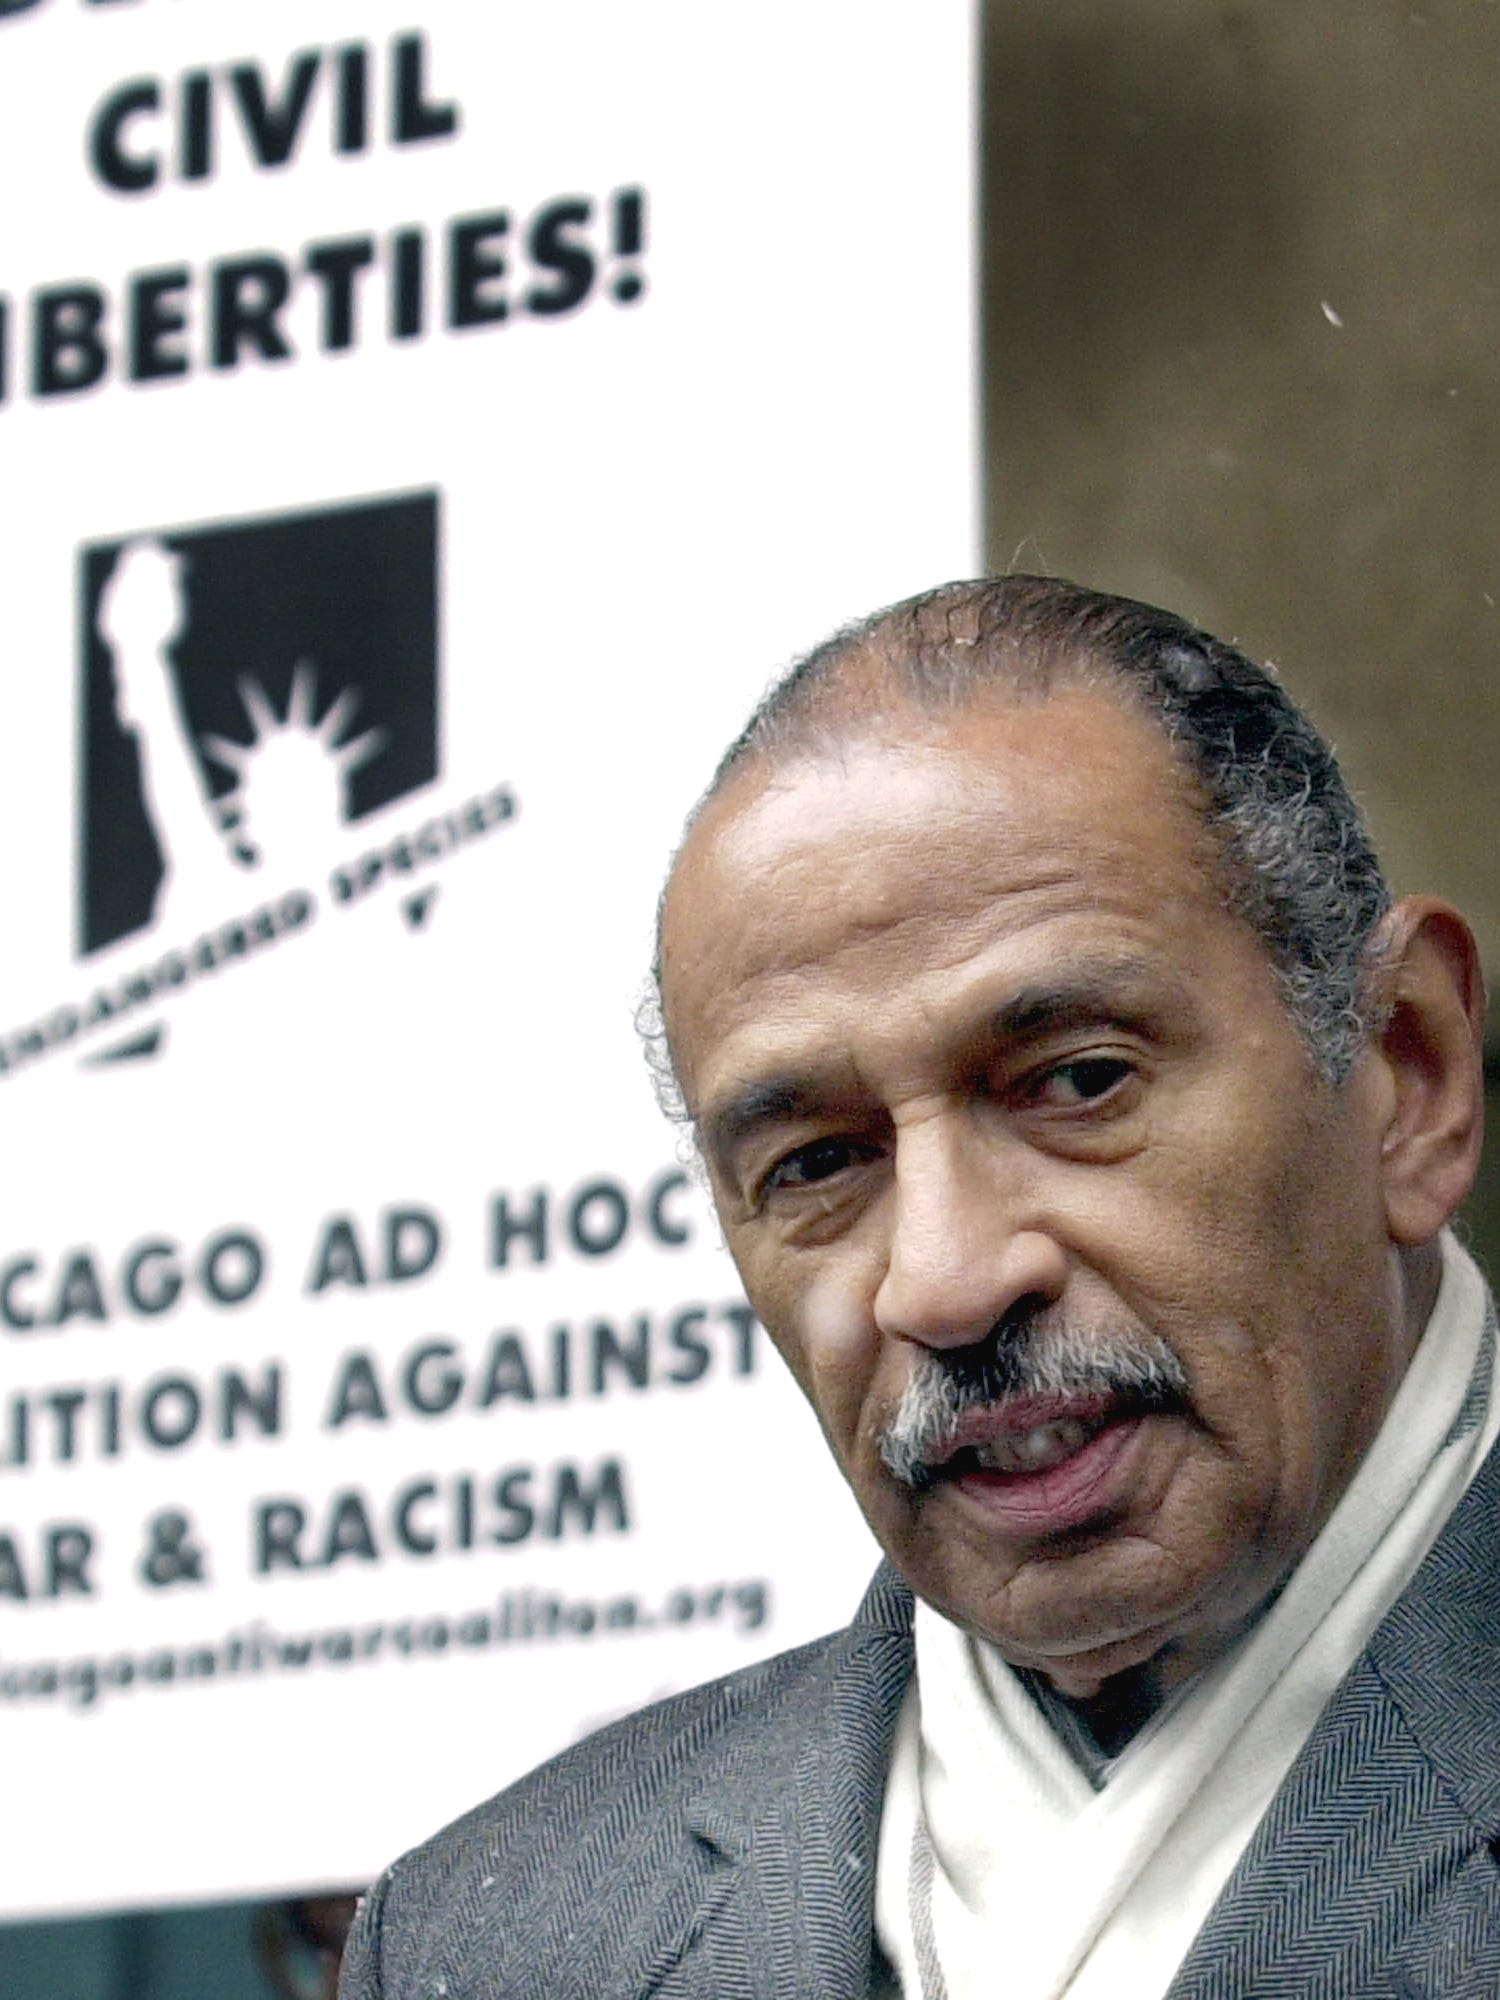 In 2002, Conyers, the ranking member of the House Judiciary Committee, talks about his visit with Muslim cleric Rabih Haddad, outside the Chicago jail where Haddad was being held. After visiting the co-founder of an Islamic charity closed down as part of the terrorism investigation, Conyers said, "There does not on the surface seem to be any reason why he should not be released on his own recognizance."